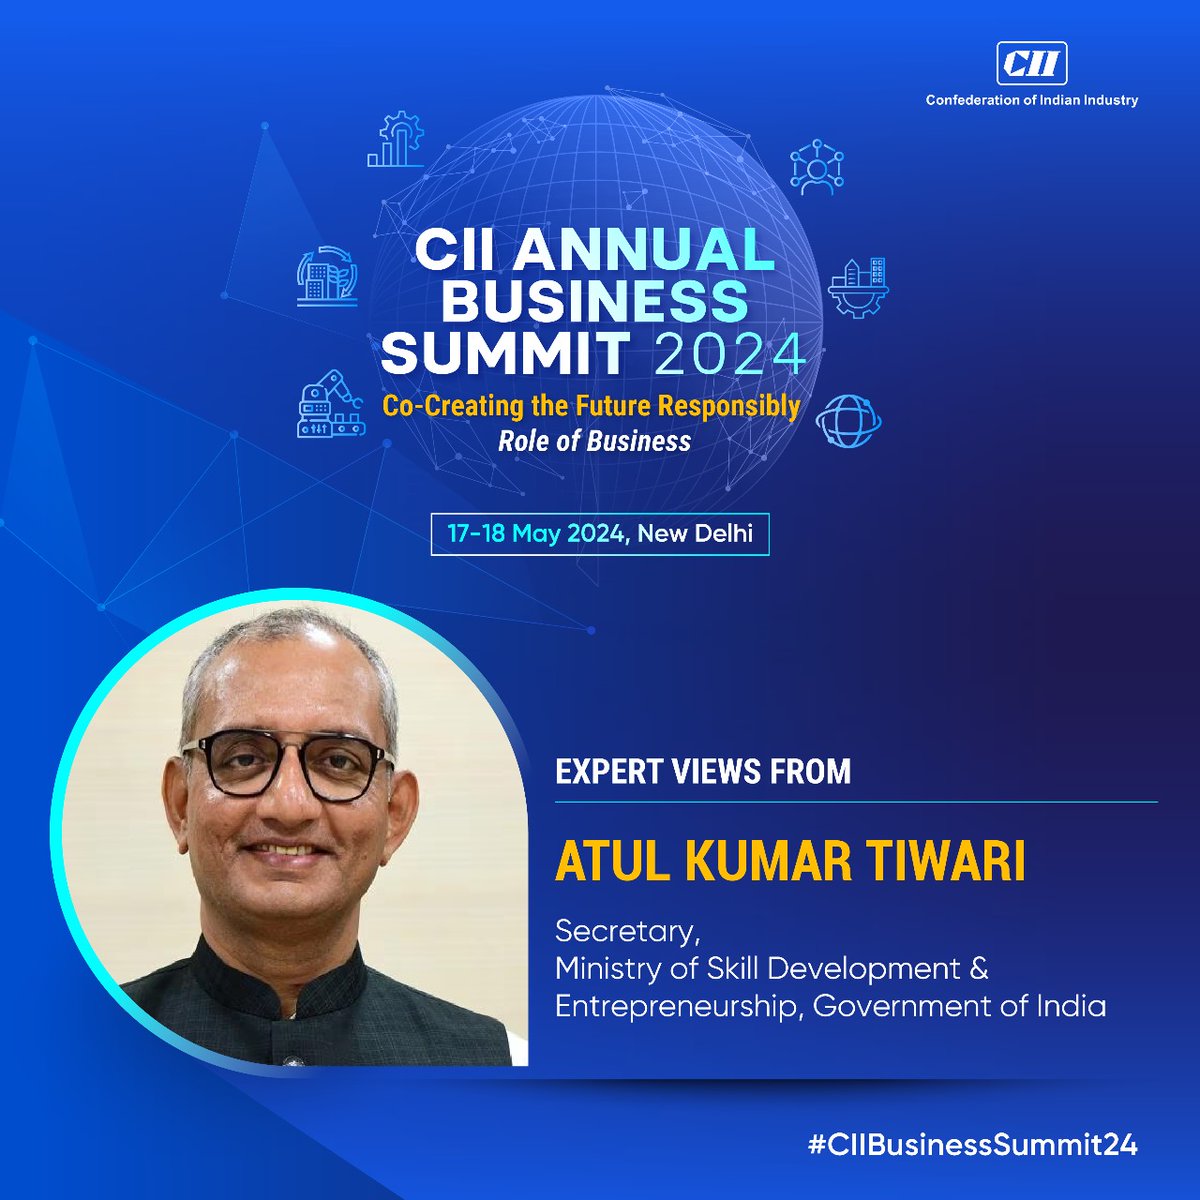 Atul Kumar Tiwari, Secretary, @MSDESkillIndia, Government of India shares thoughts at the CII Annual Business Summit 2024! Listen to insightful discussions as thought leaders and experts collaboratively map out a trajectory for India's growth. Block your calendar ➡17-18 May